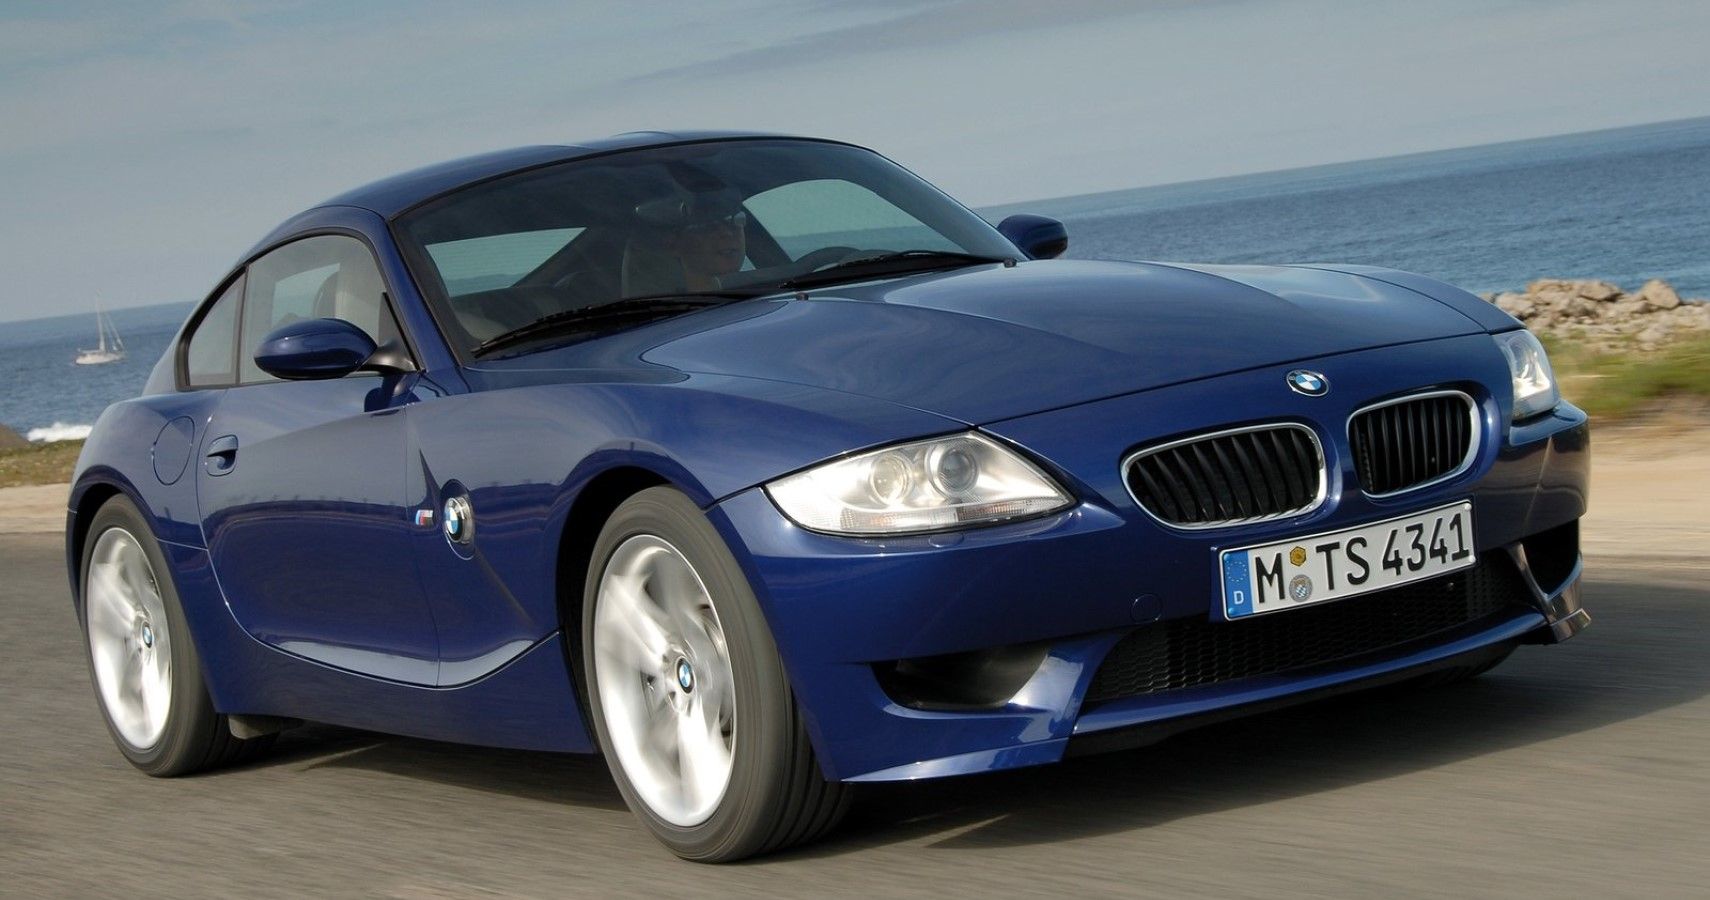 2006 BMW Z4 M Coupe front third quarter view